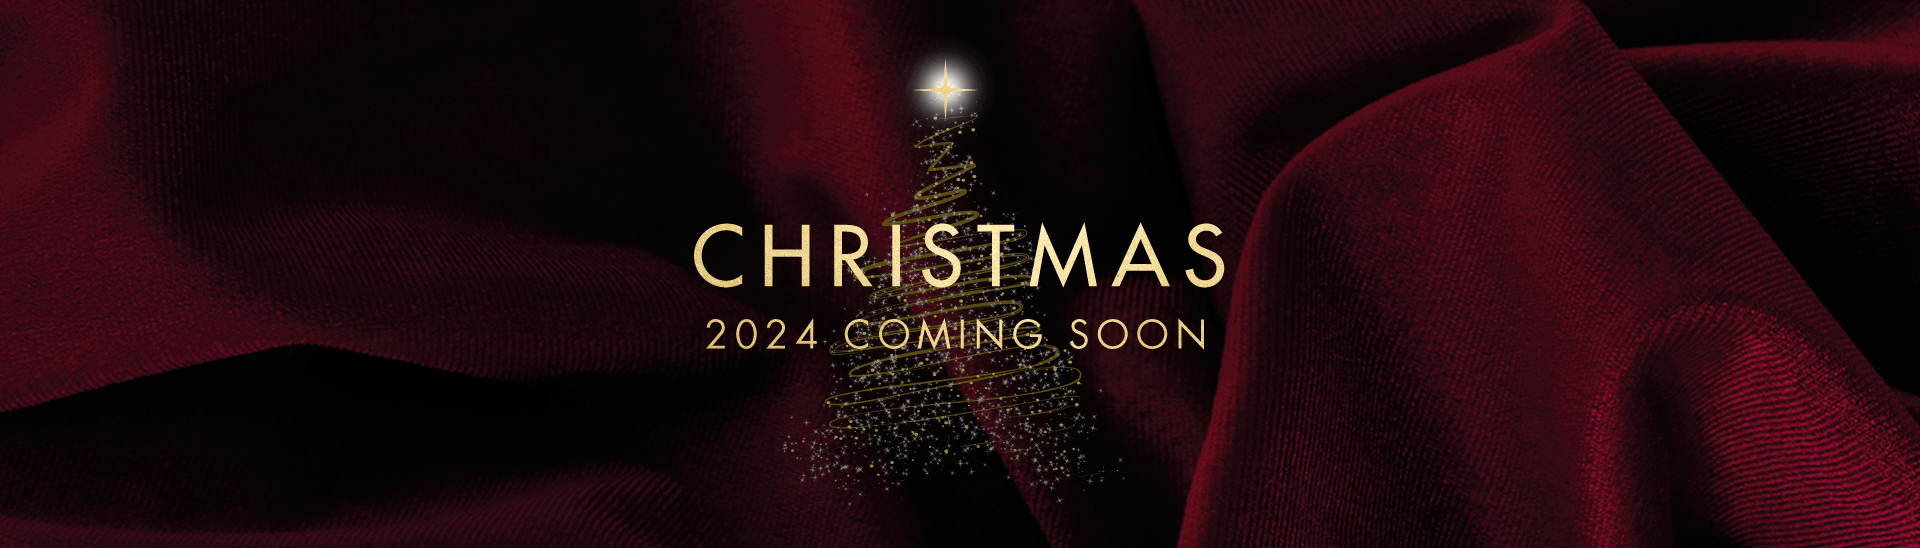 Christmas 2024 at West Sussex